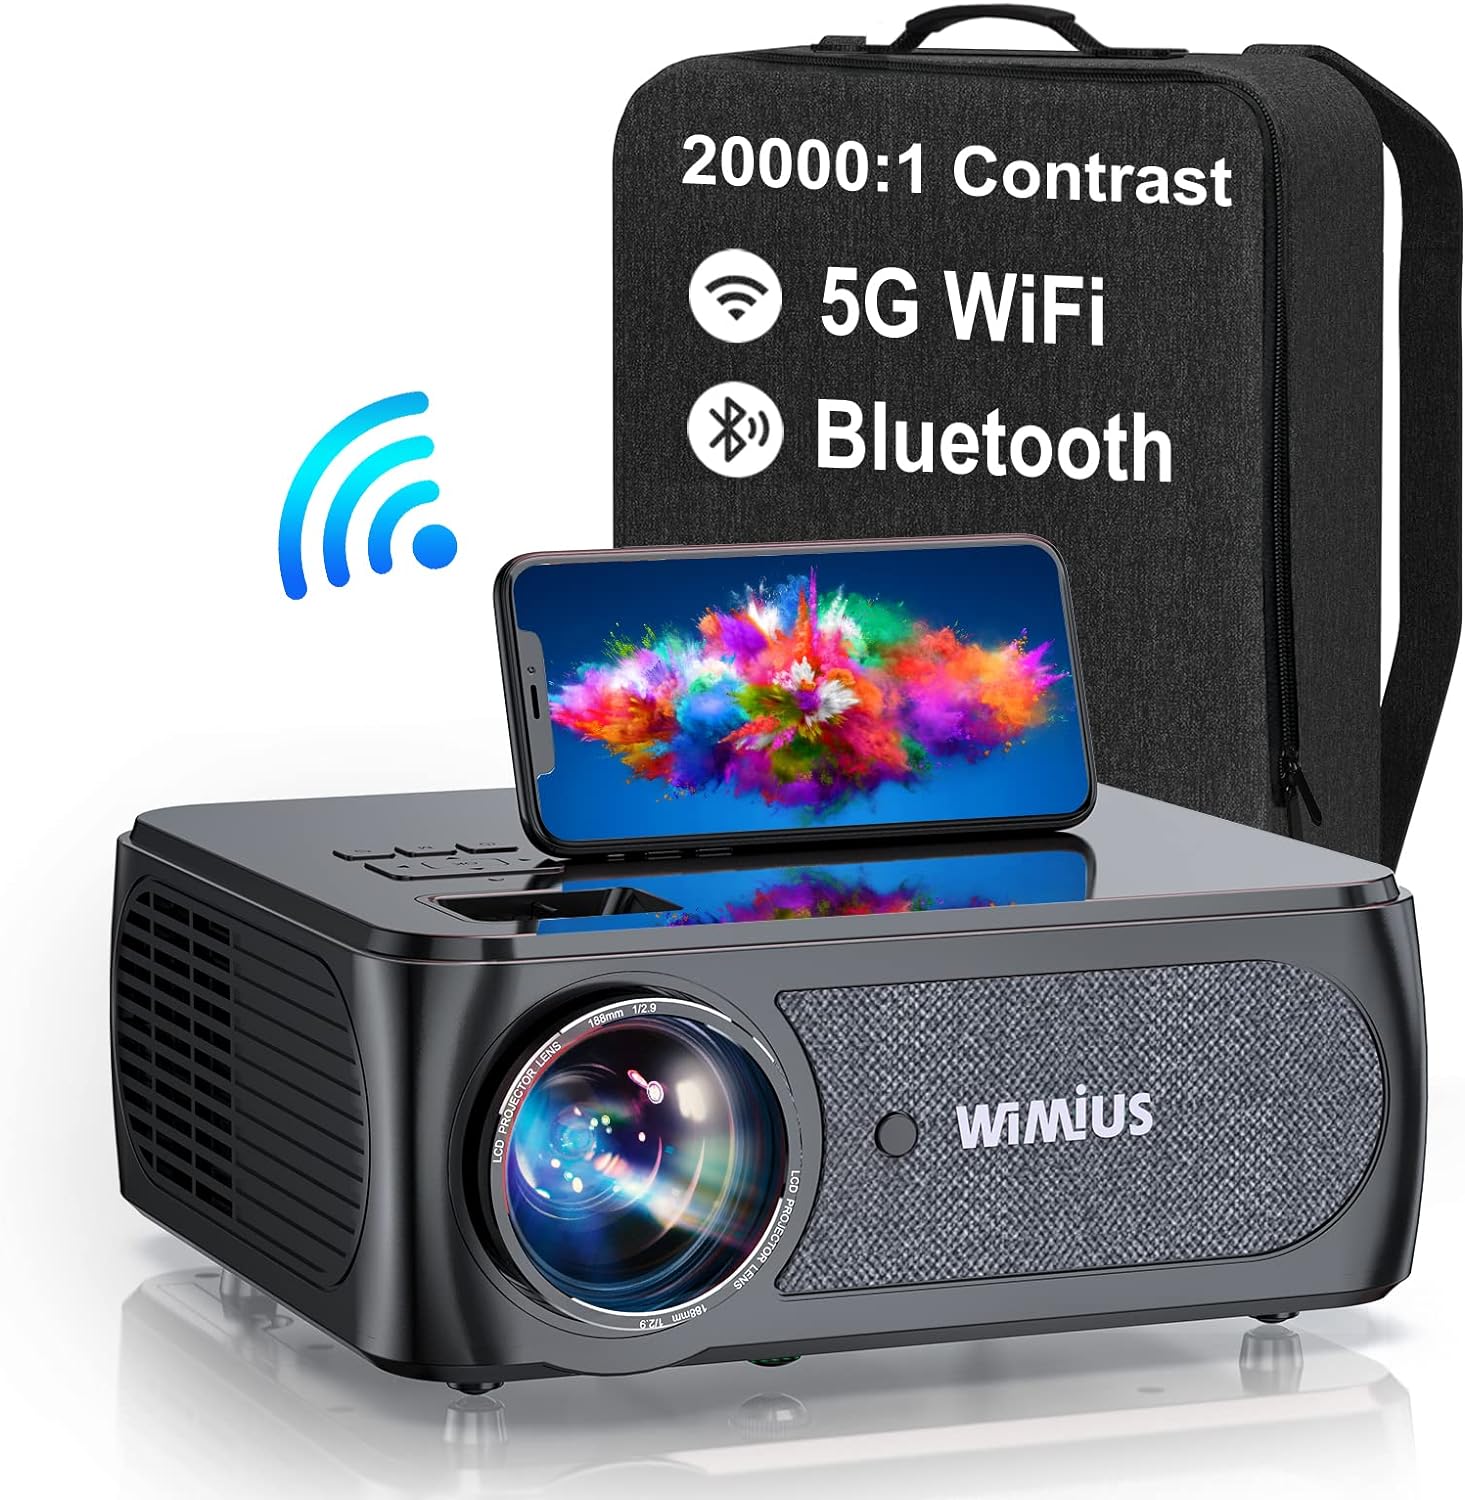 WiMiUS Home Projector K1 – WiMiUS Official